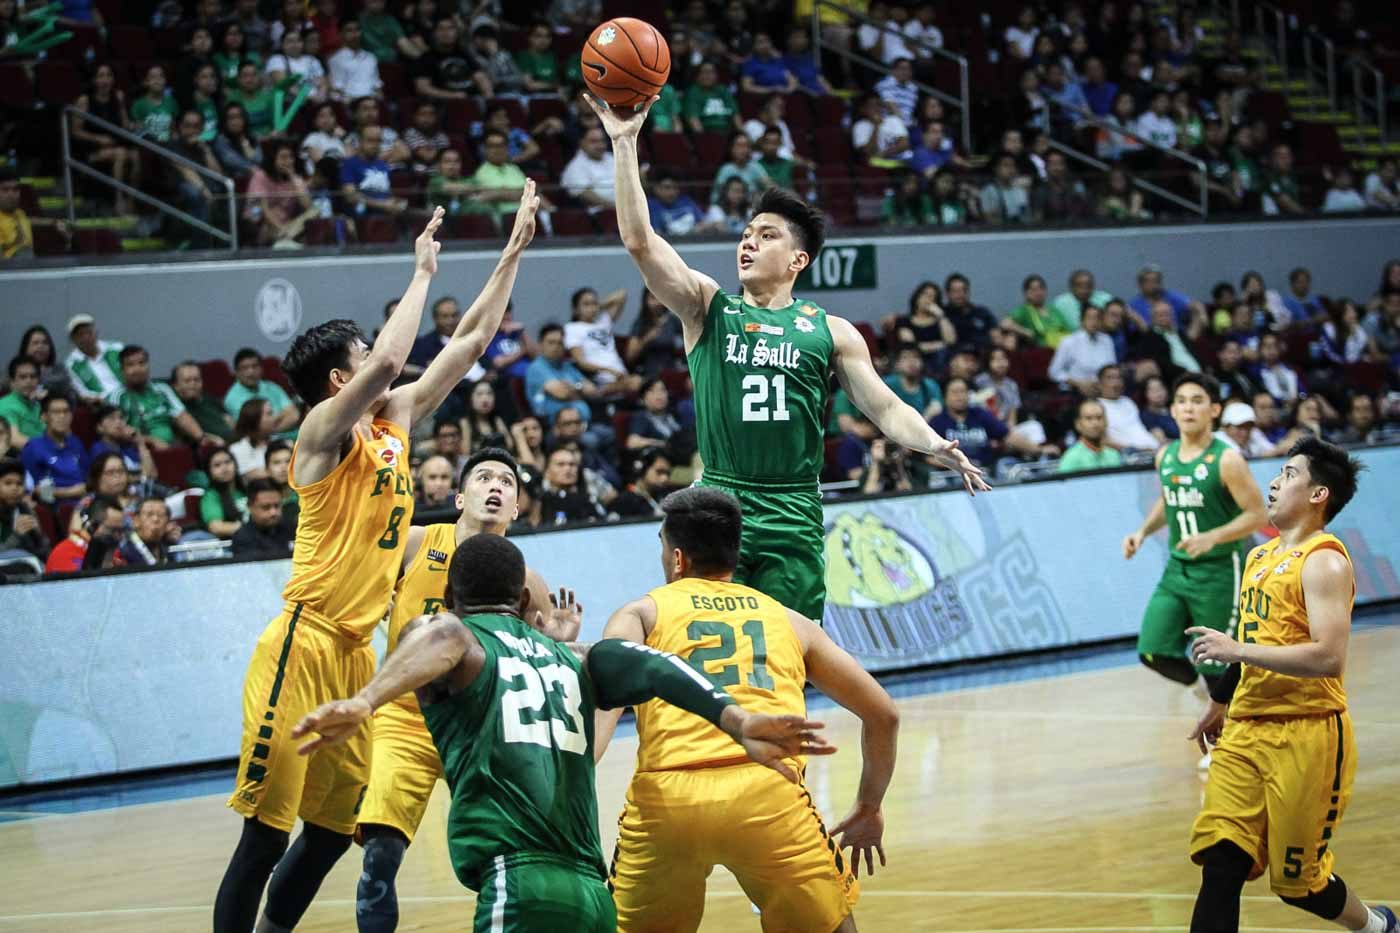 La Salle takes down rival FEU to finish eliminations at 13-1